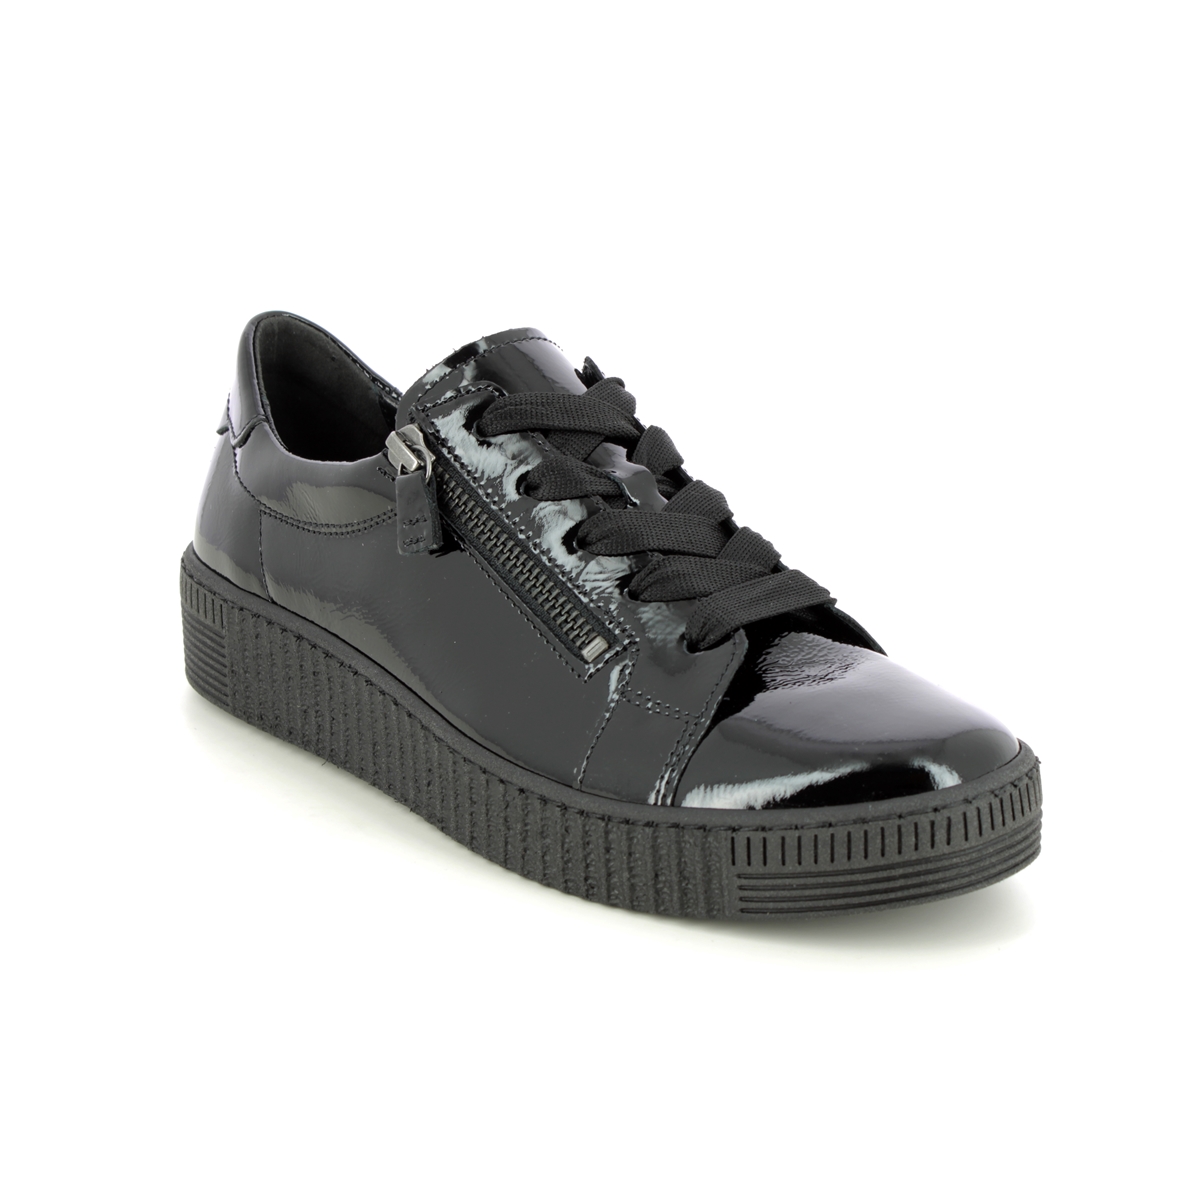 Gabor Wisdom Black Patent Womens Trainers 93.334.97 In Size 6.5 In Plain Black Patent  Womens Trainers In Soft Black Patent Leather